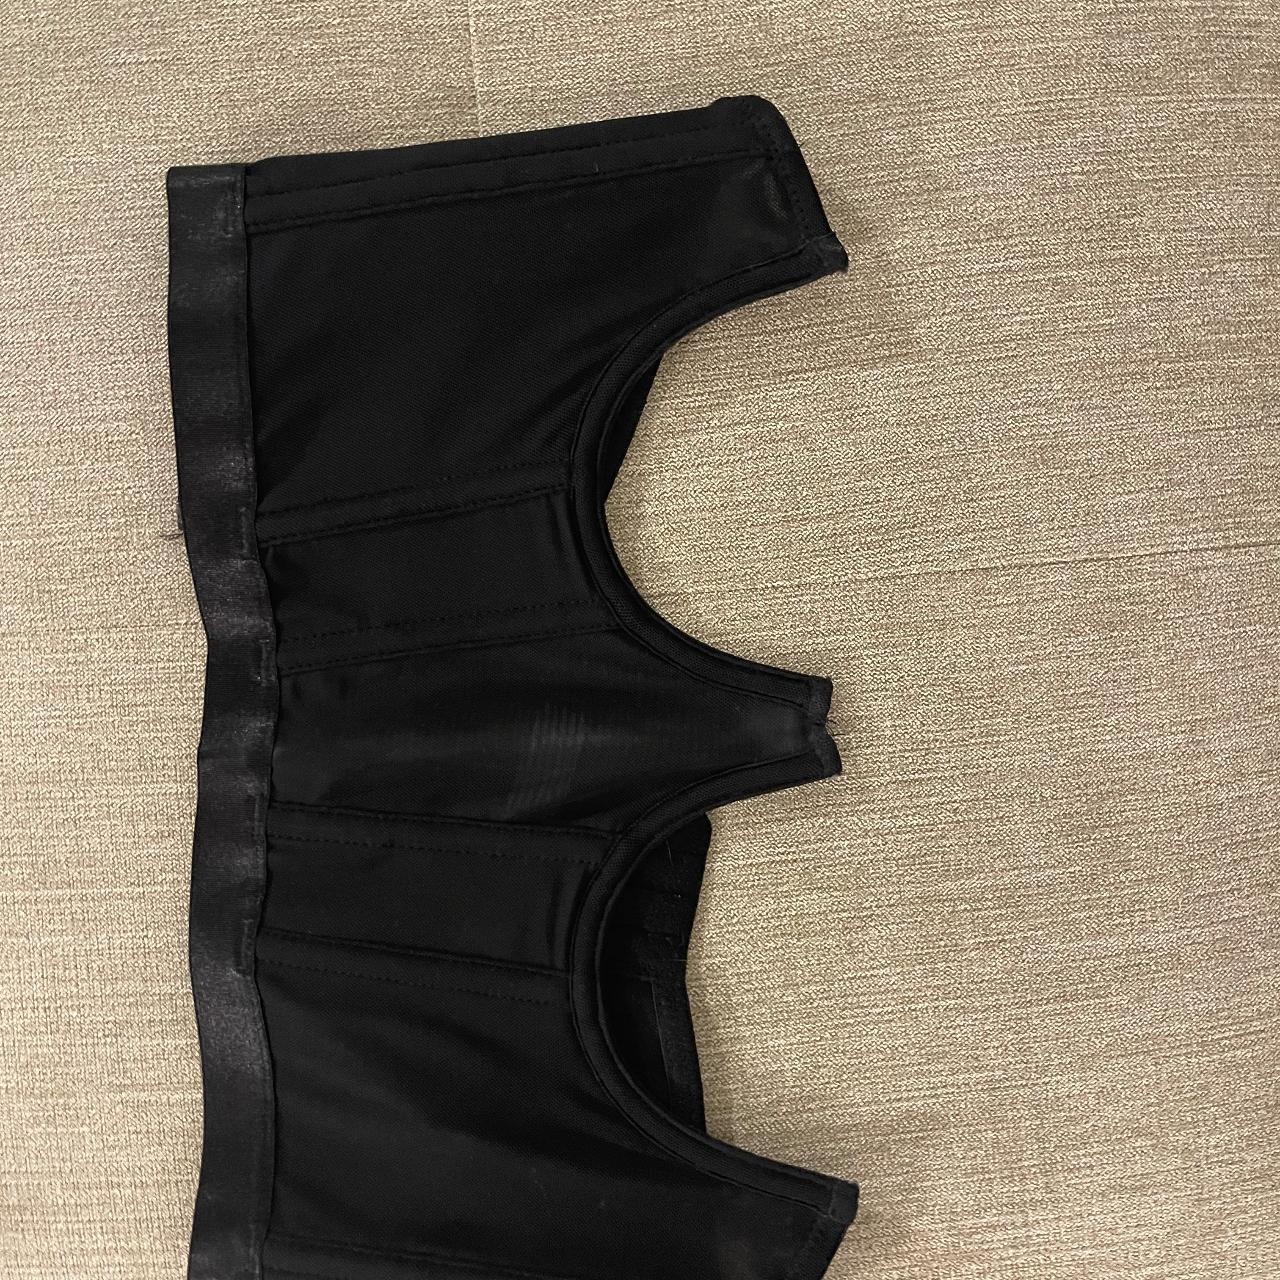 Black corset form urban outfitters. Corset is to... - Depop